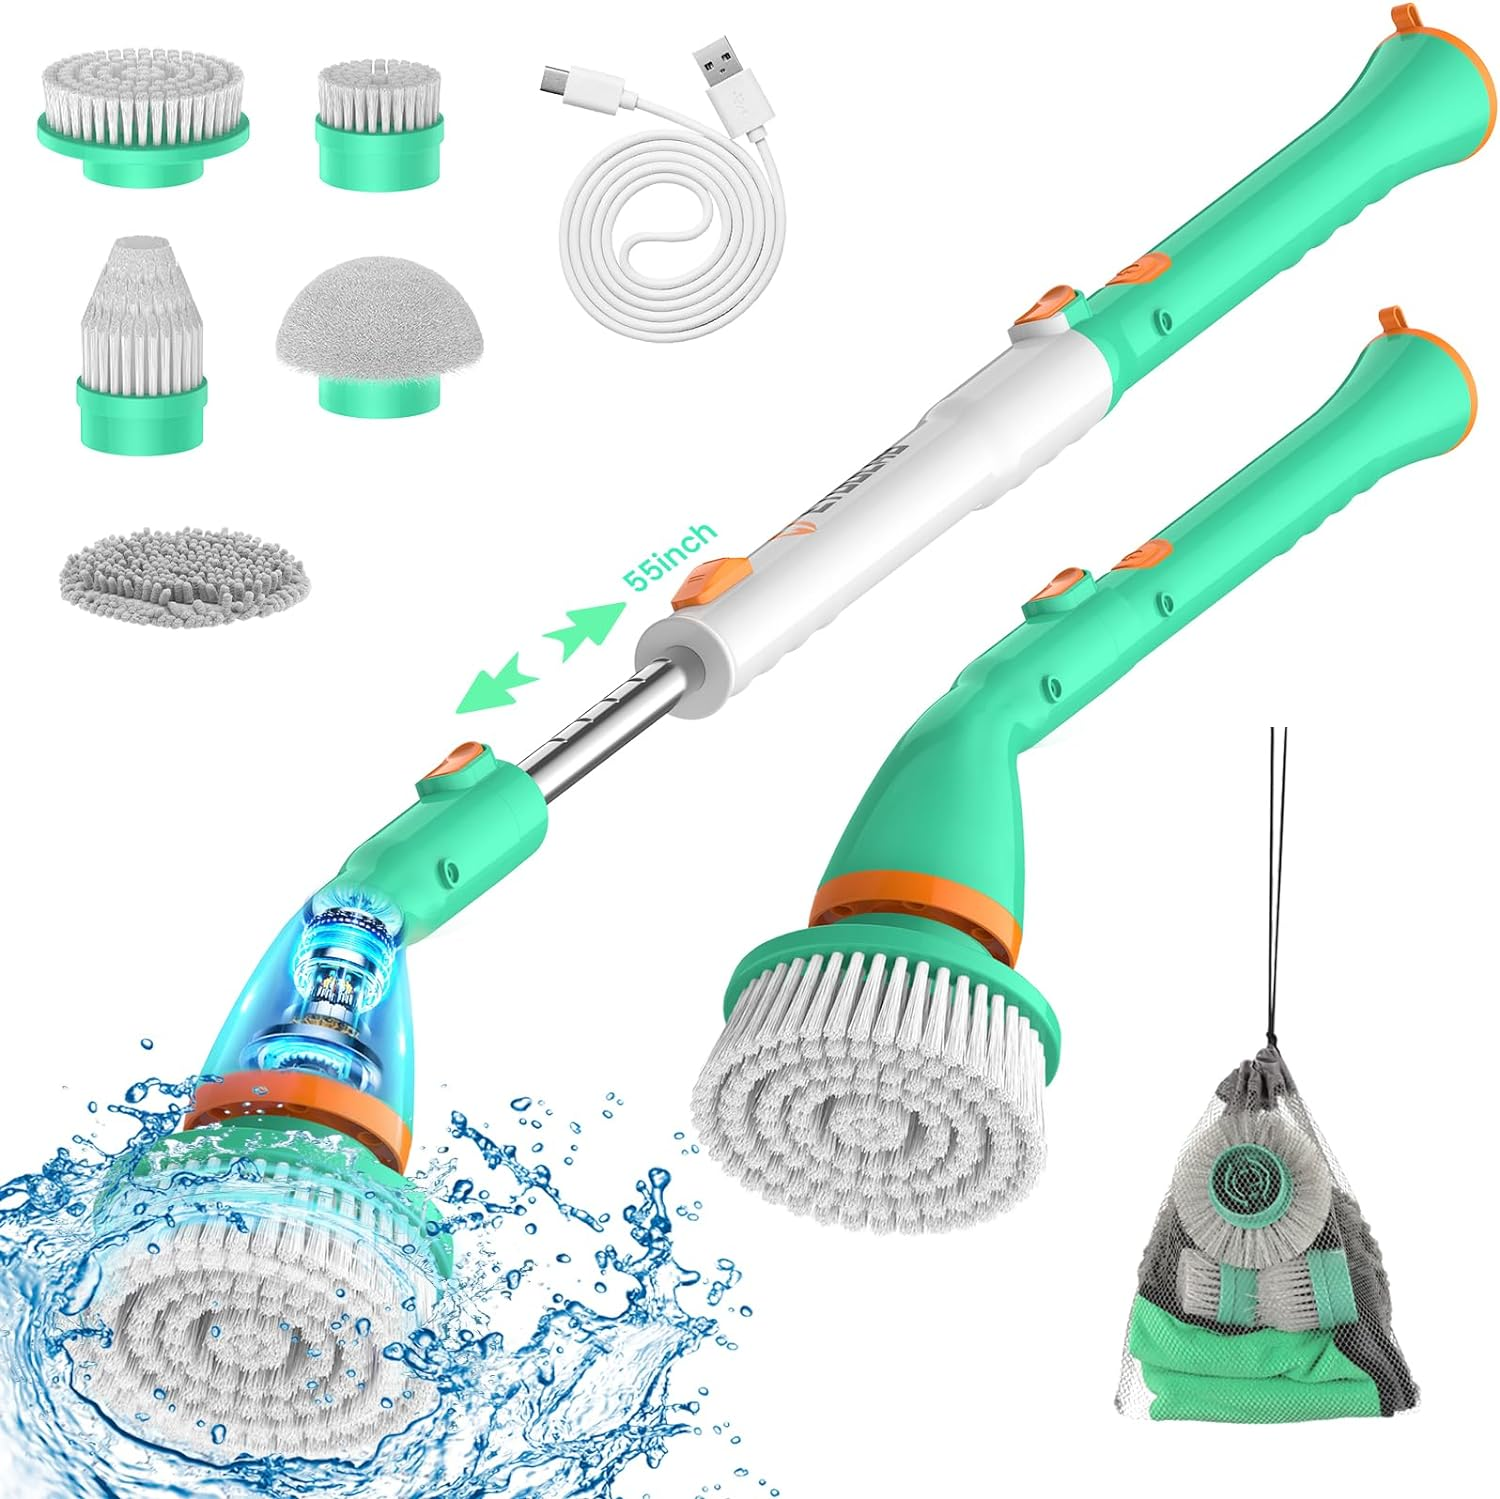 Electric Spin Scrubber Brush Powerful Turbo Scrub Cleaning